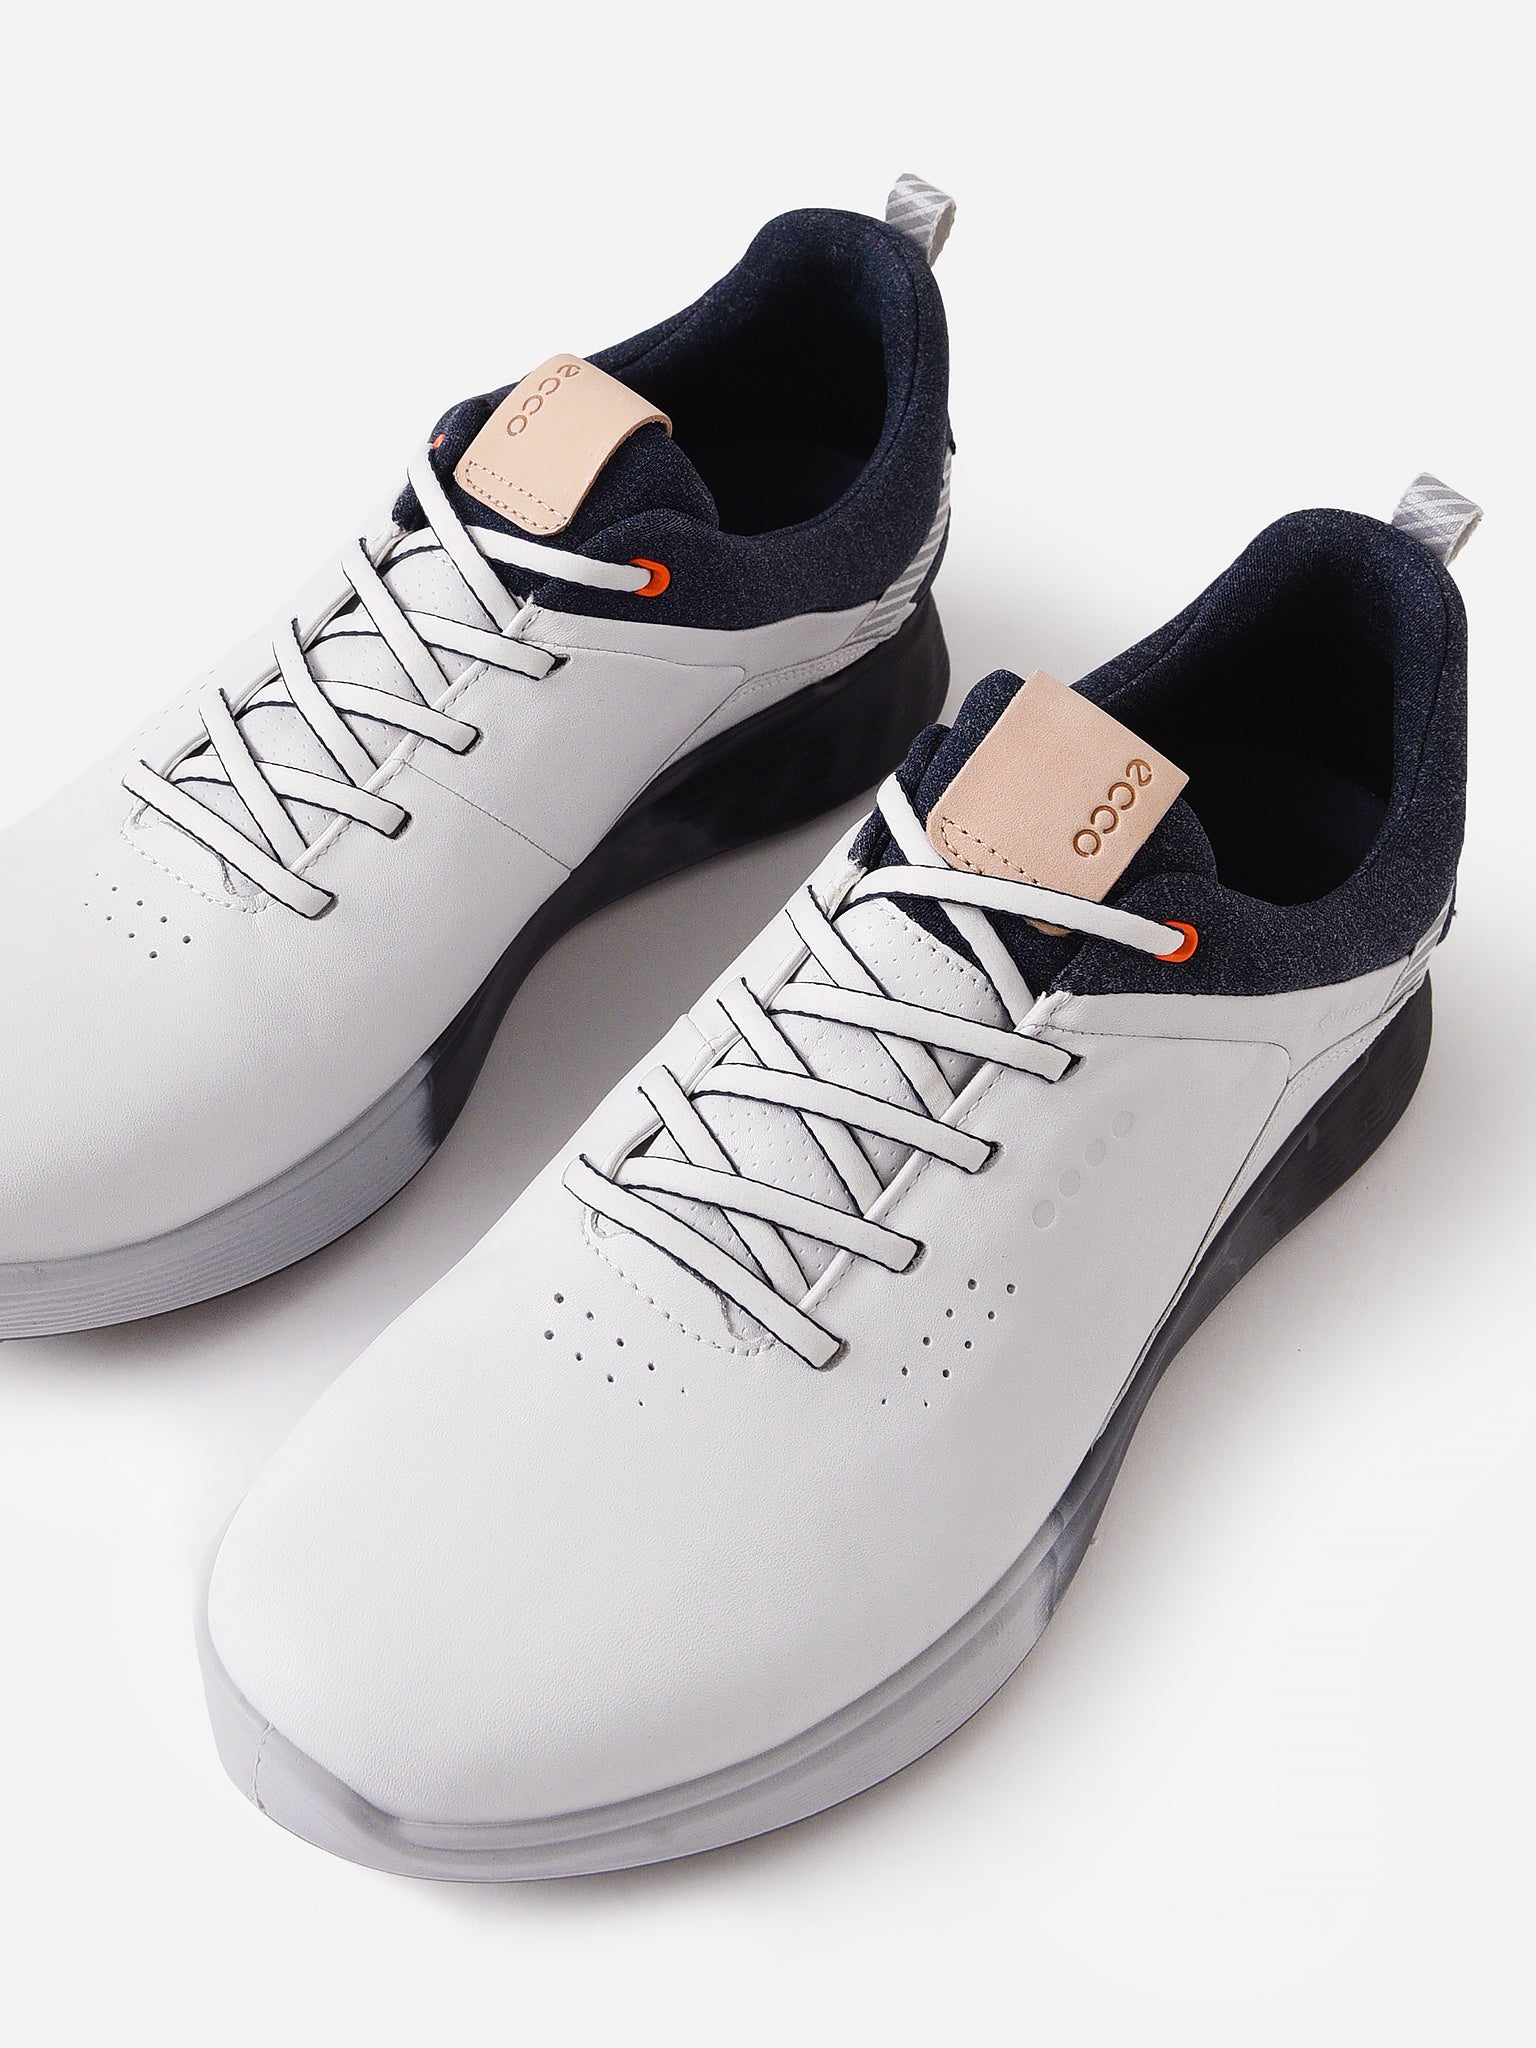 Ecco Golf S-Three Spikeless Shoes